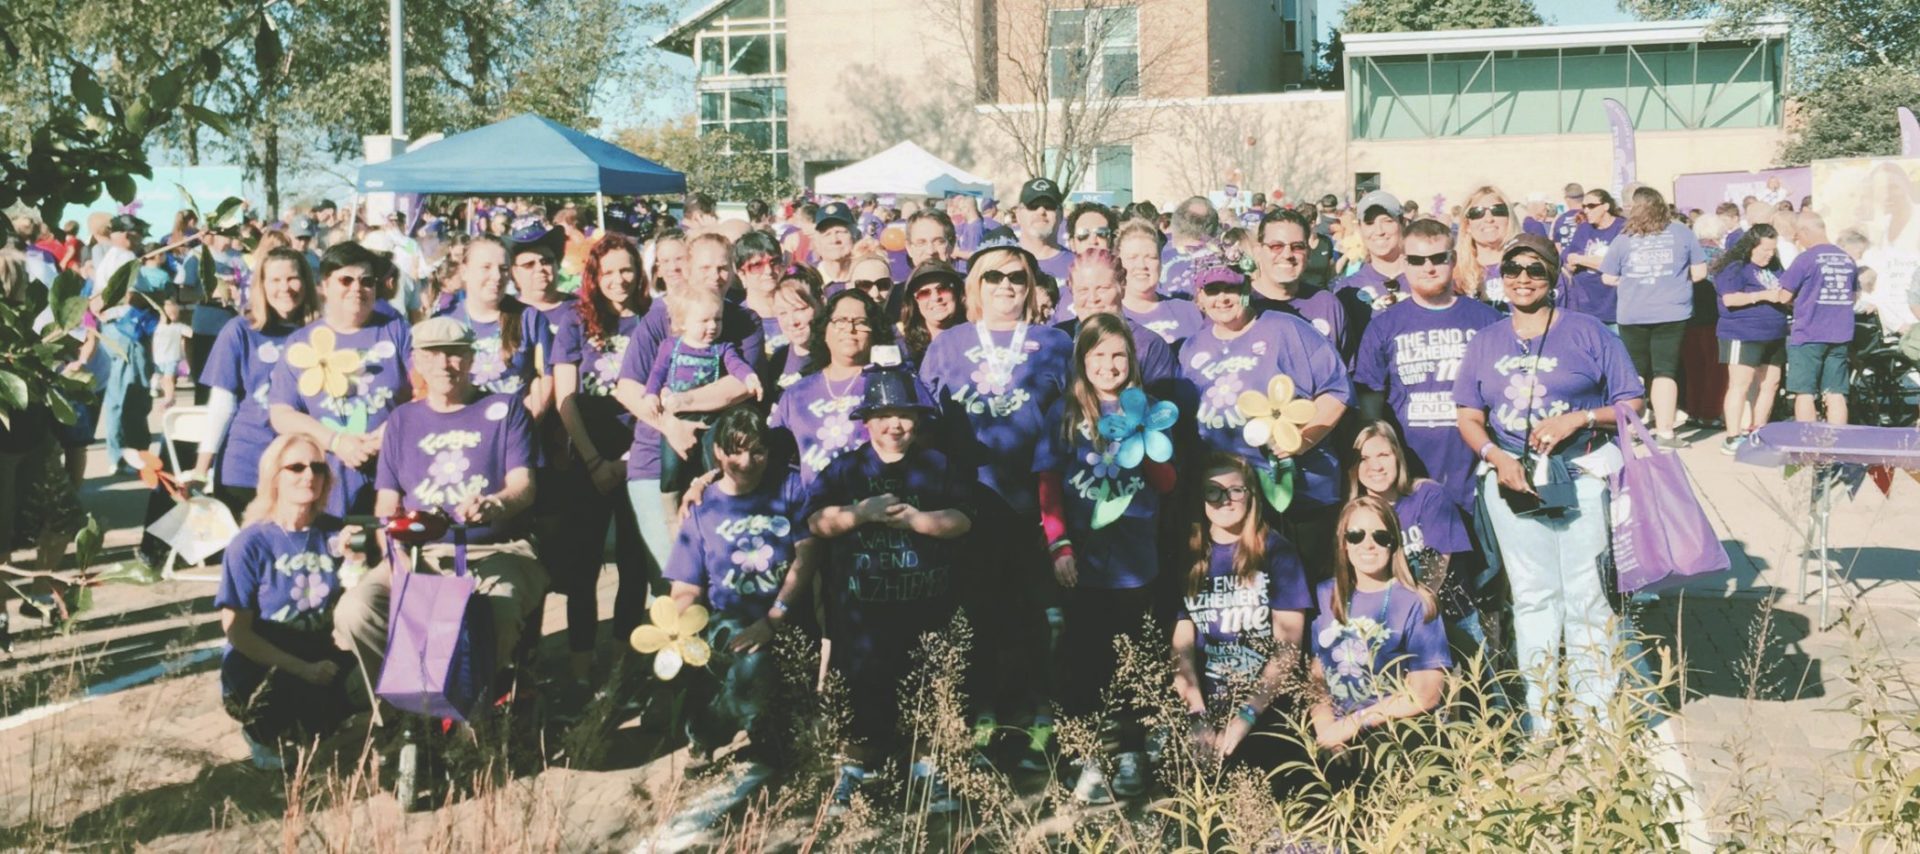 Join us for The Walk to End Alzheimer’s